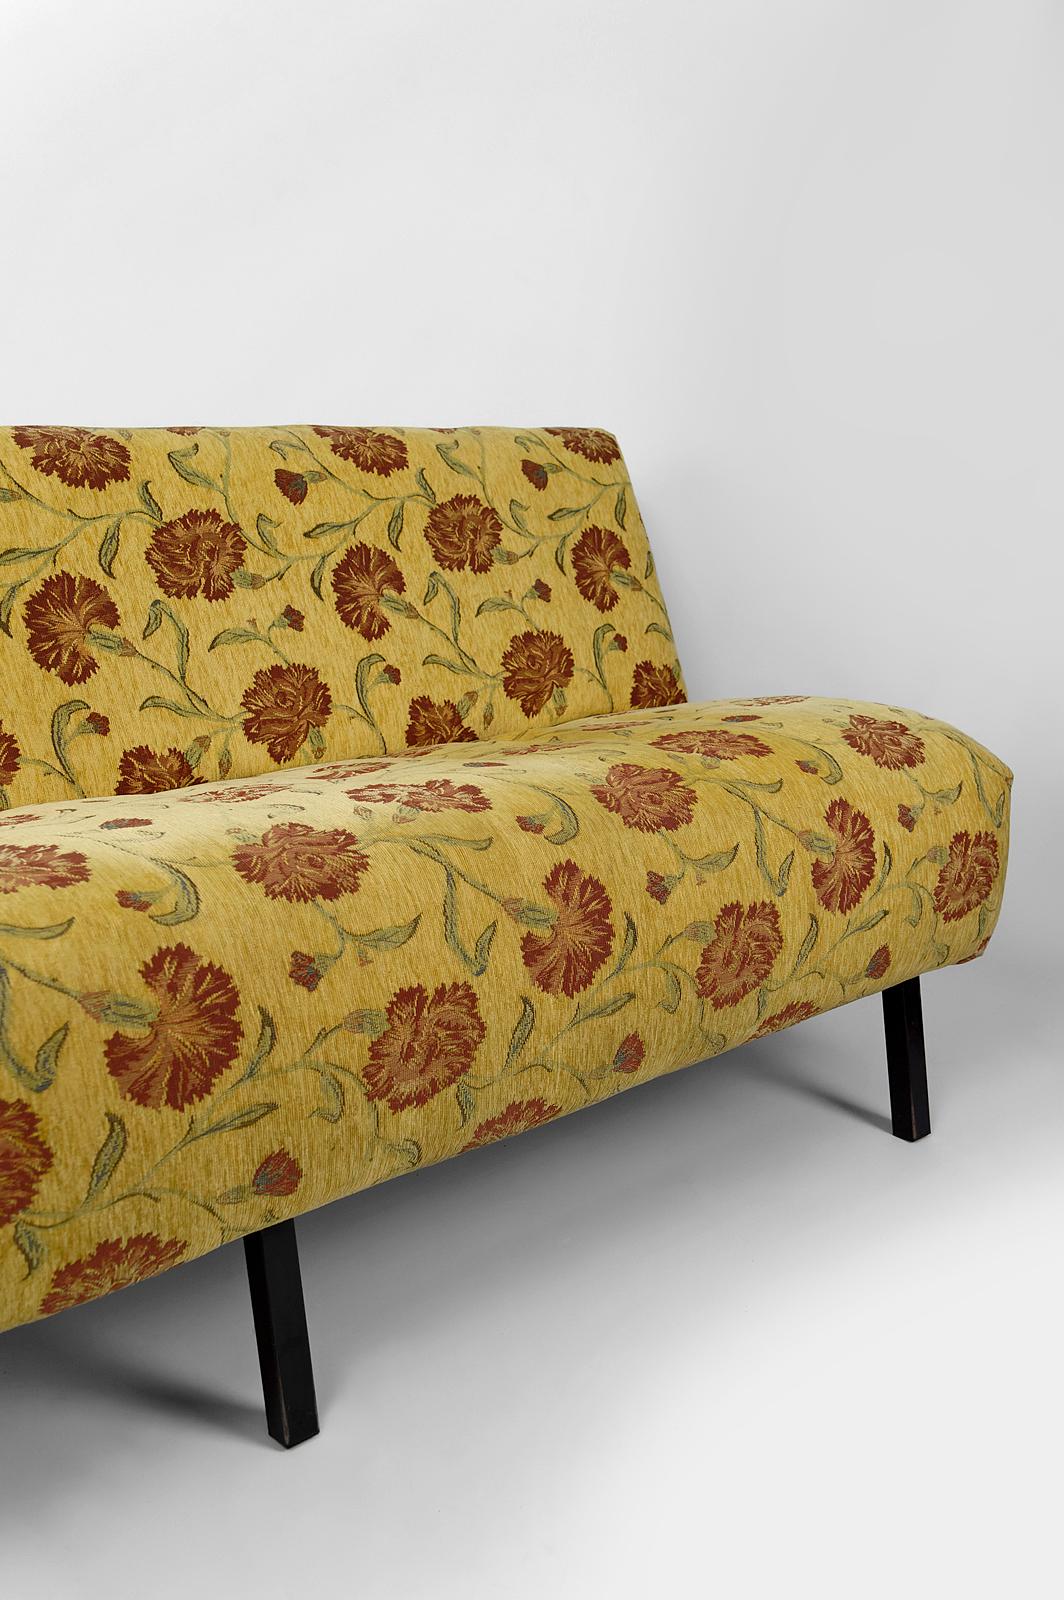 Vintage Boho sofa with yellow and red floral fabric, France, Circa 1960 For Sale 3